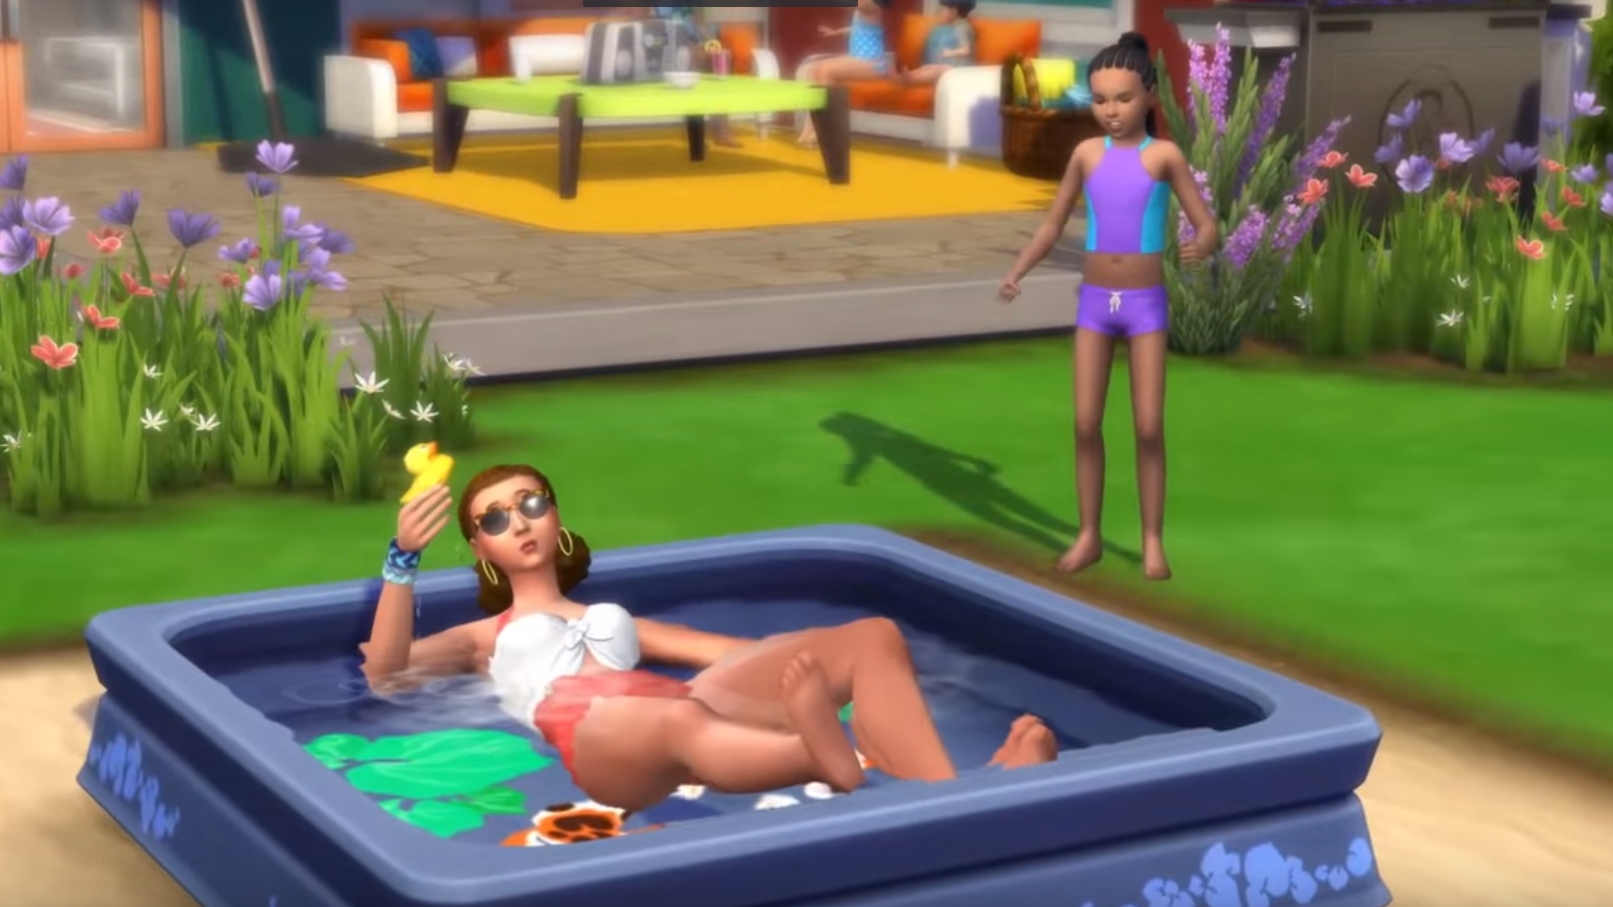 The Sims 4 seasons - A sim relaxes in a blowup pool